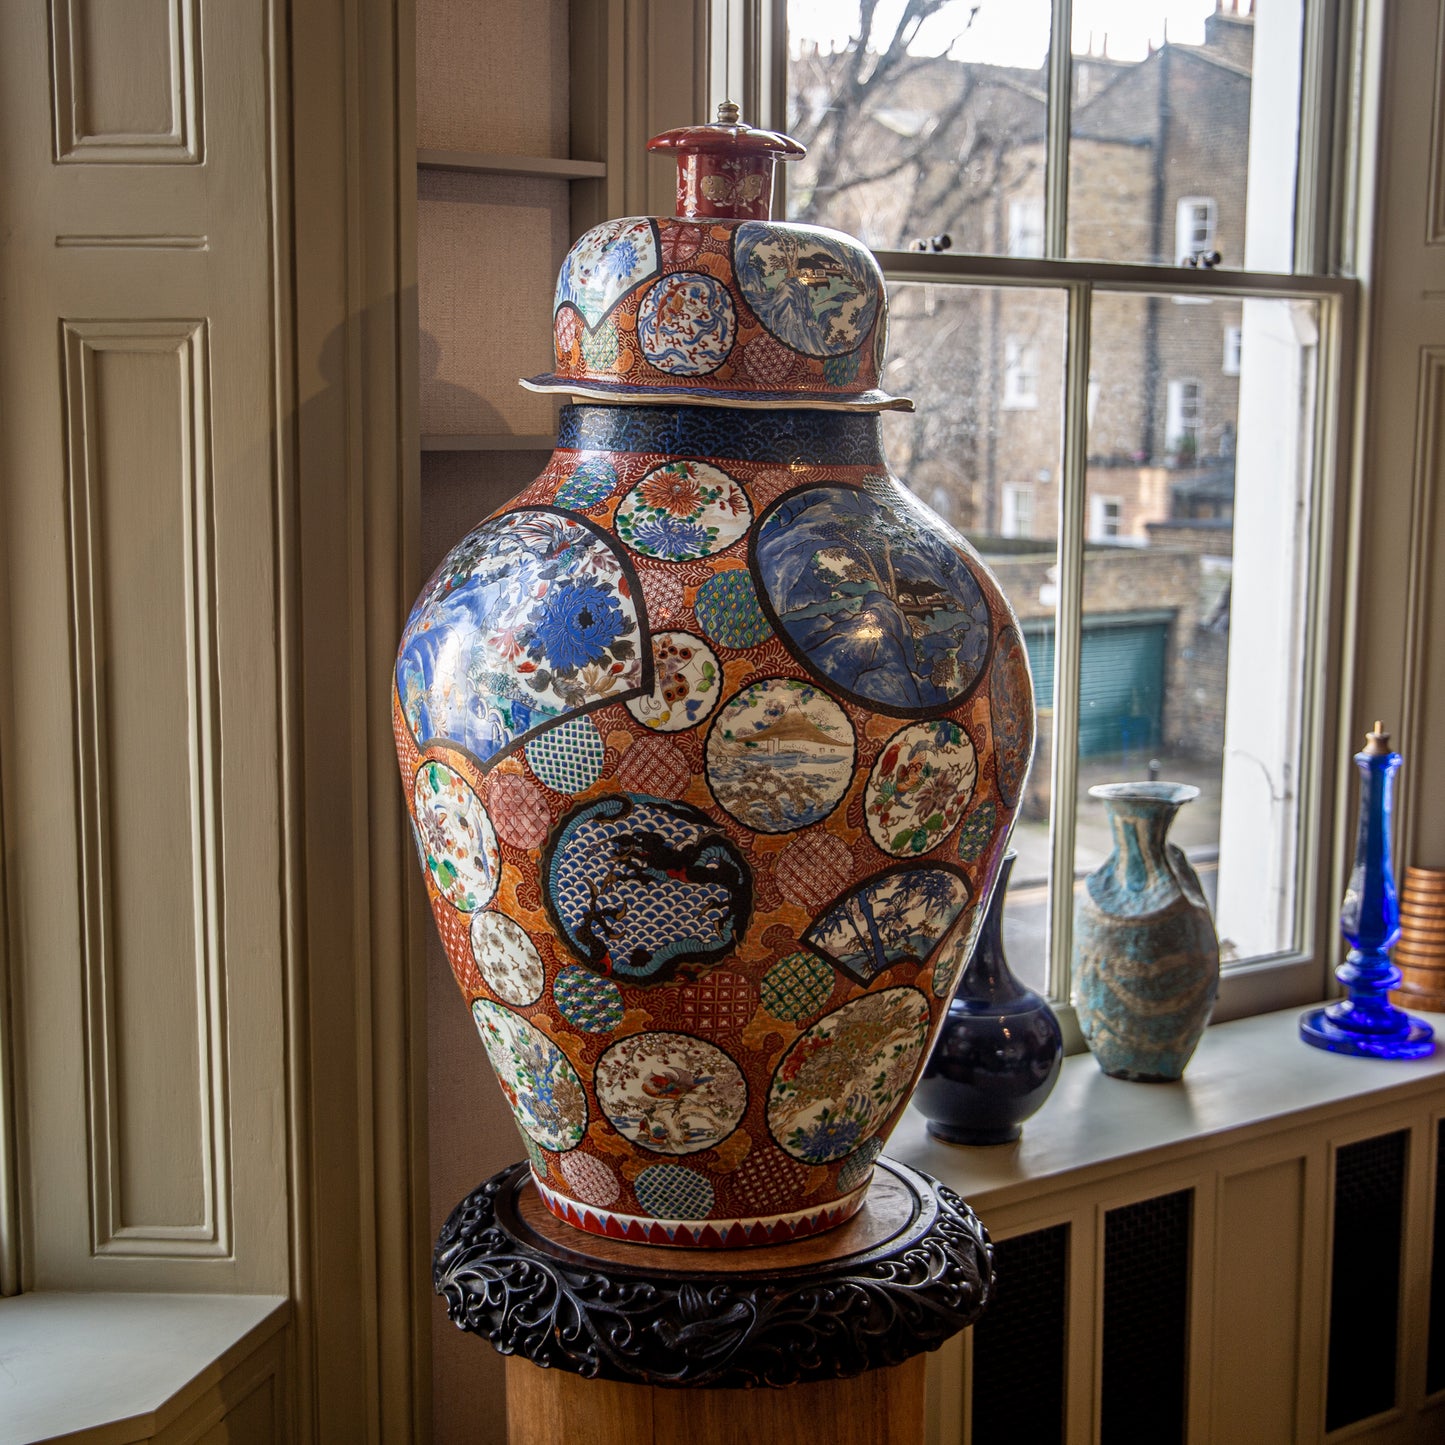 AN UNUSUALLY LARGE JAPANESE IMARI VASE AND COVER